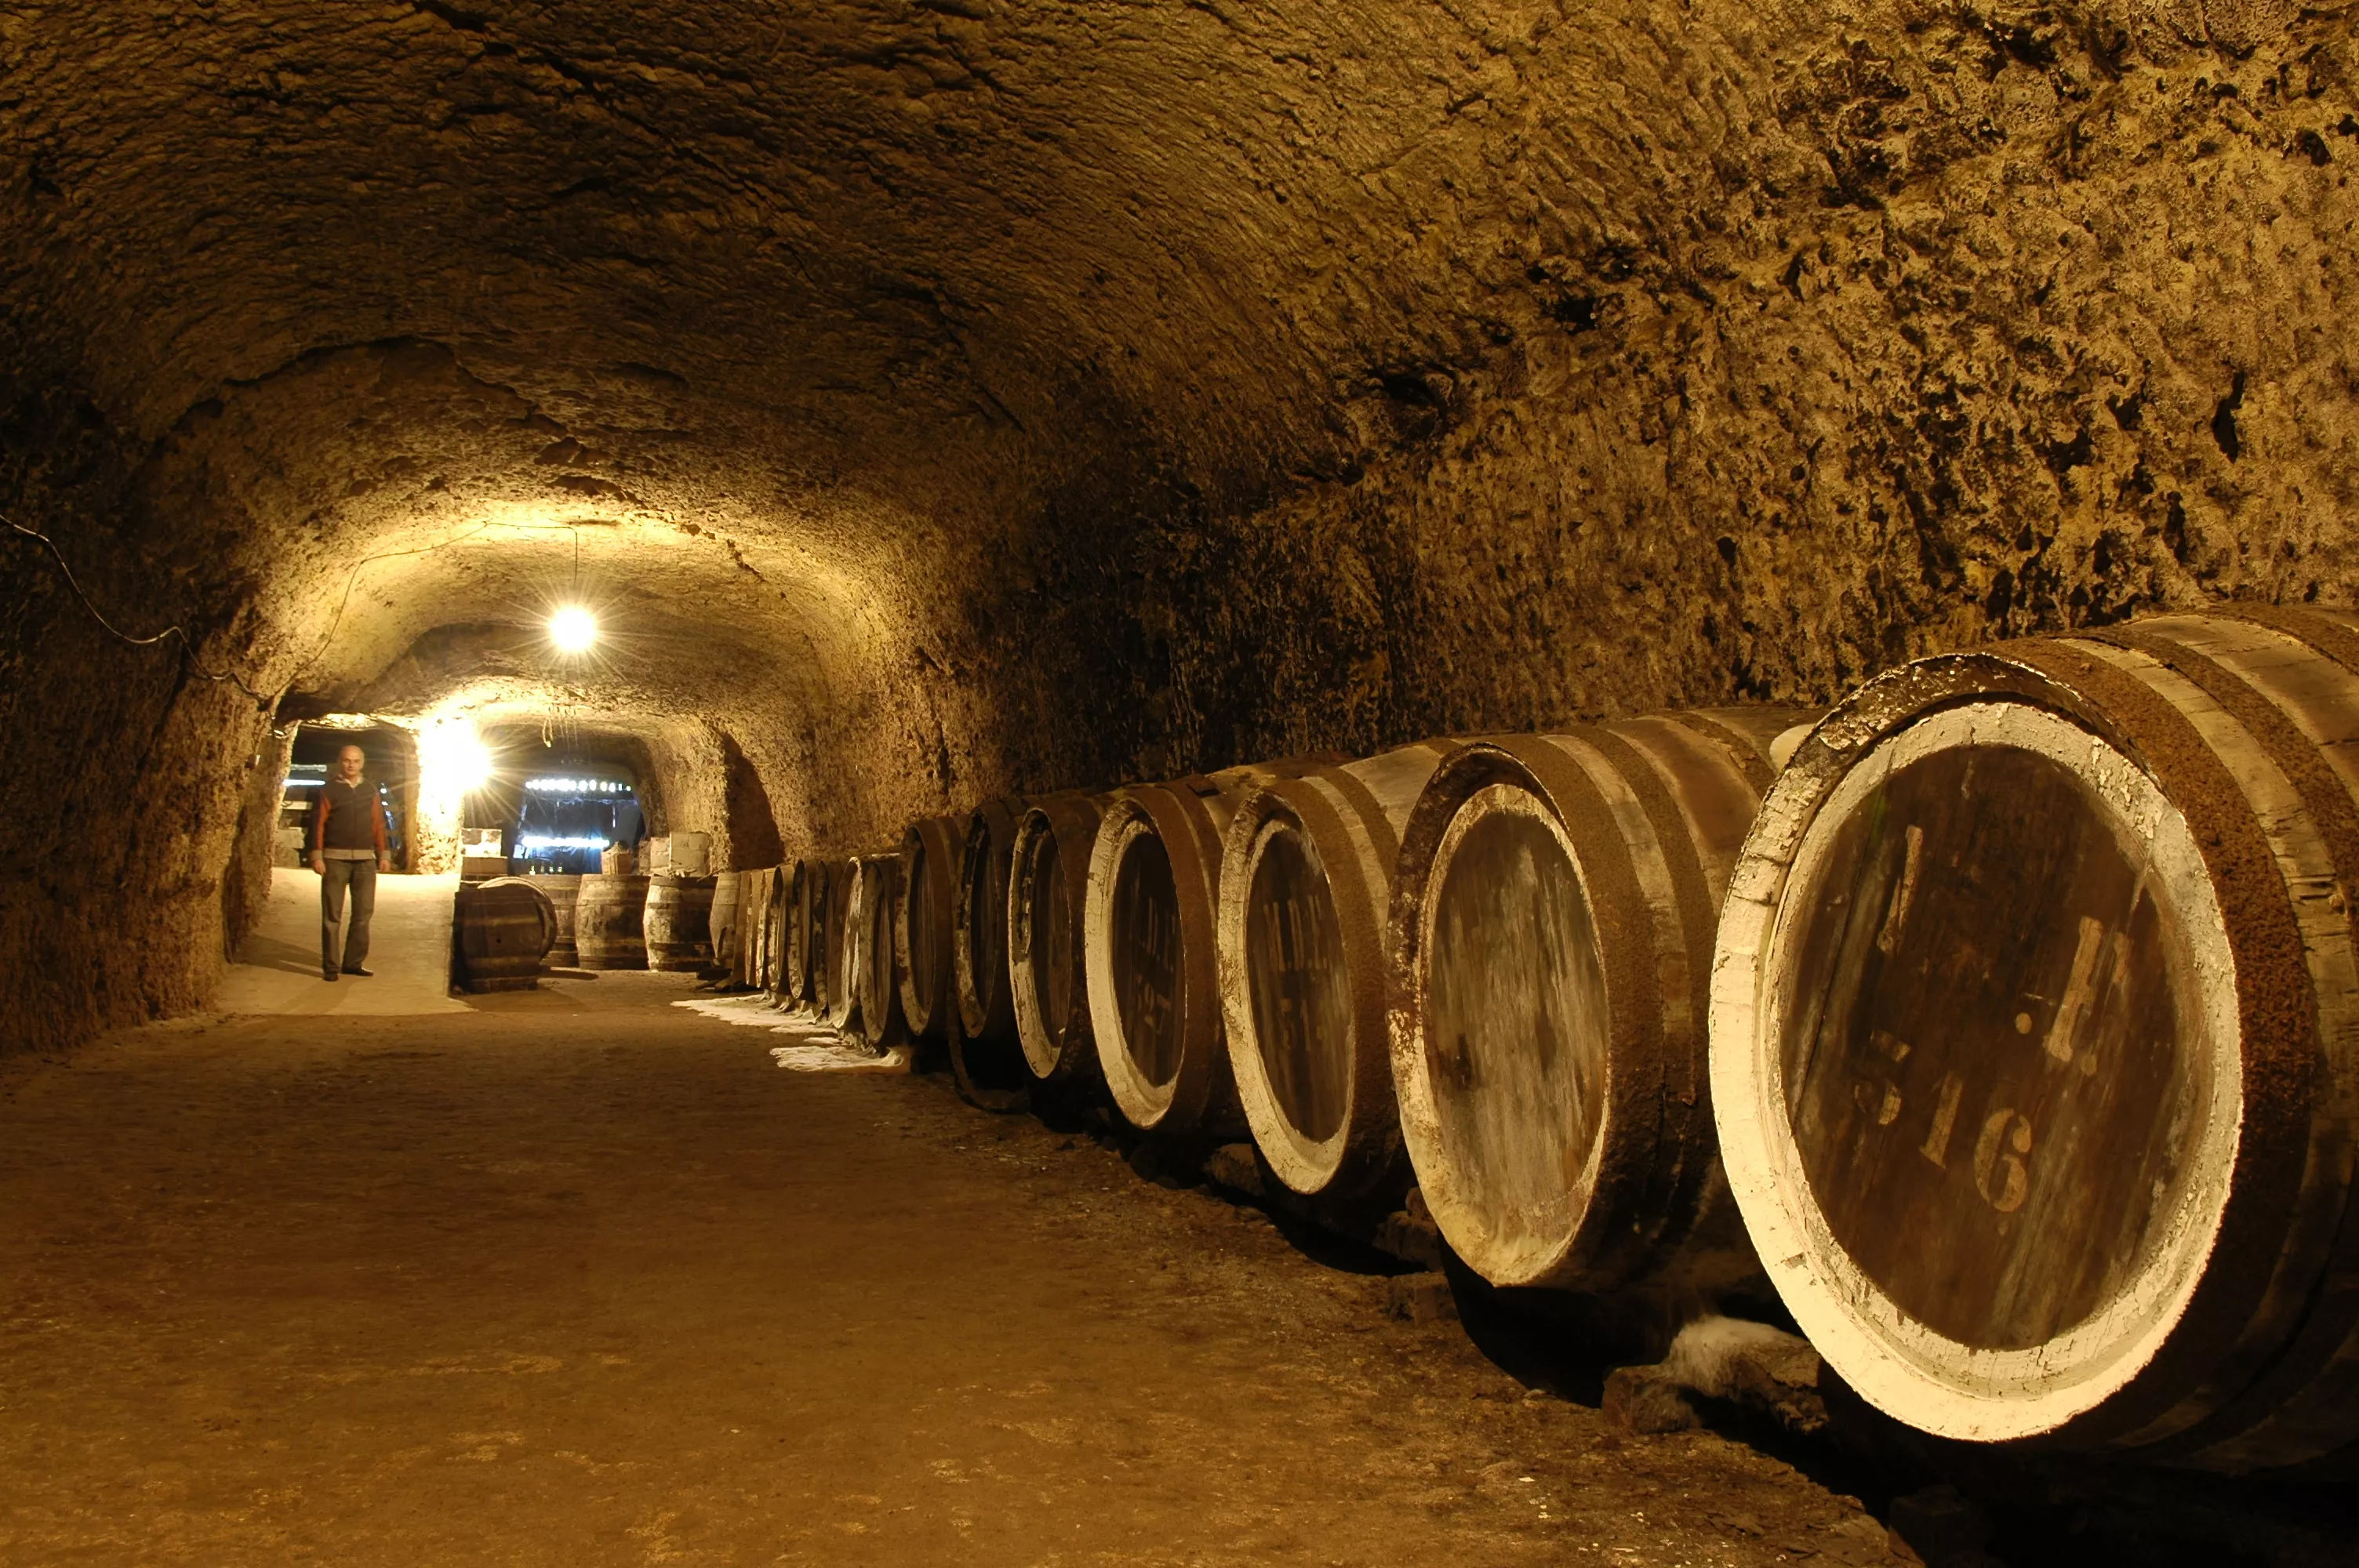 Les Caves Duhard in France, Europe | Caves & Underground Places,Wineries - Rated 3.3